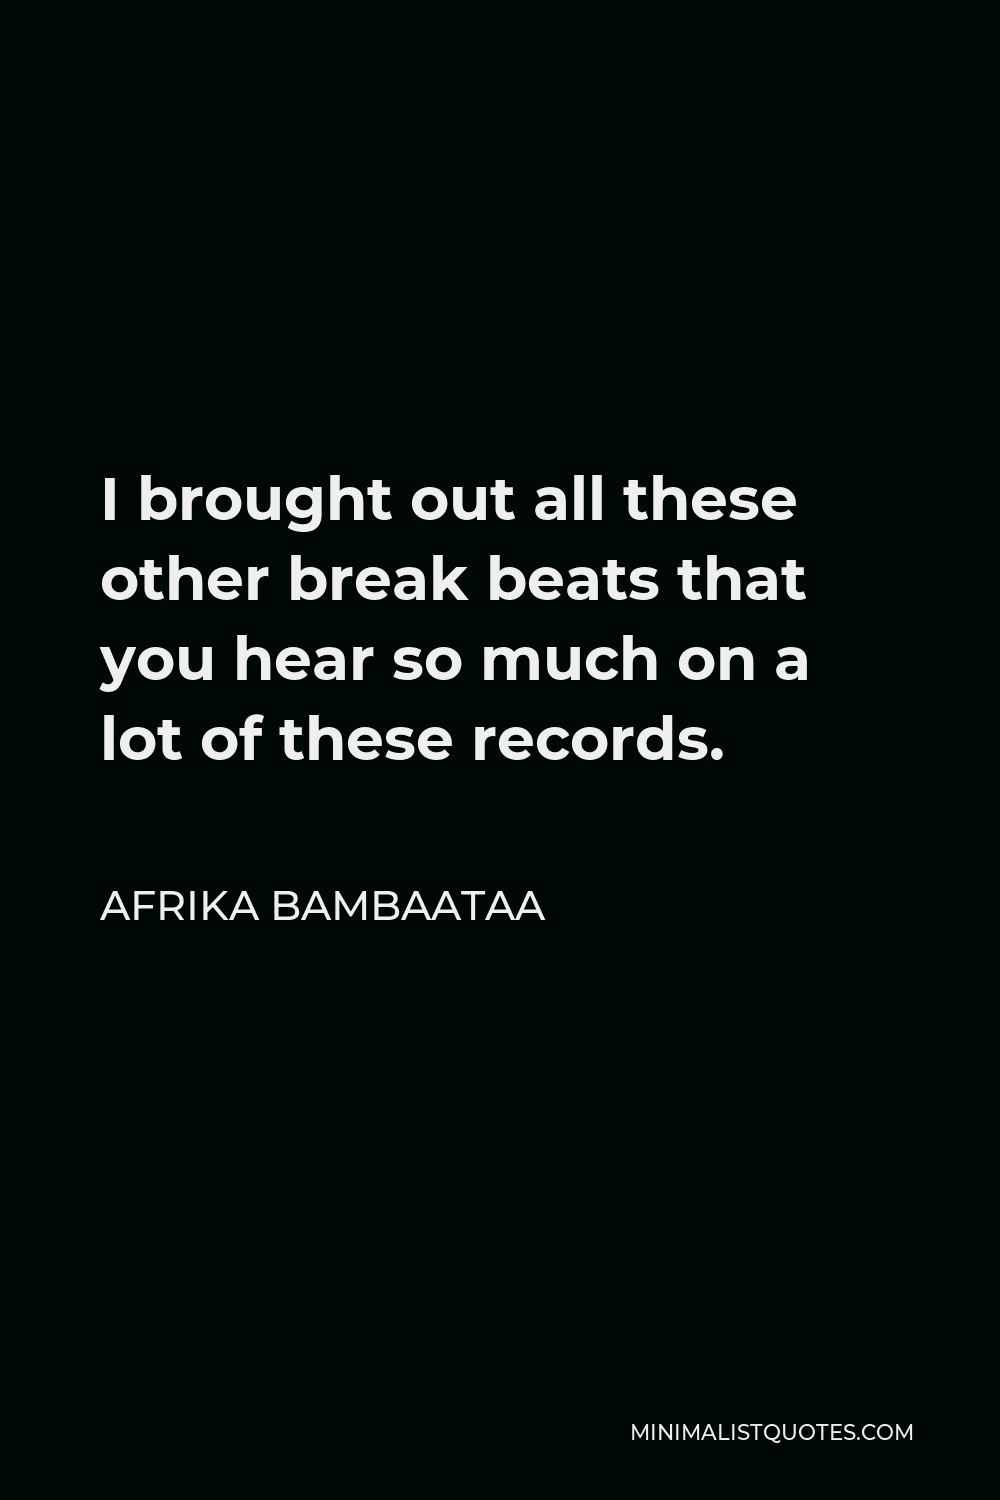 Afrika Bambaataa Quote - I brought out all these other break beats that you hear so much on a lot of these records.